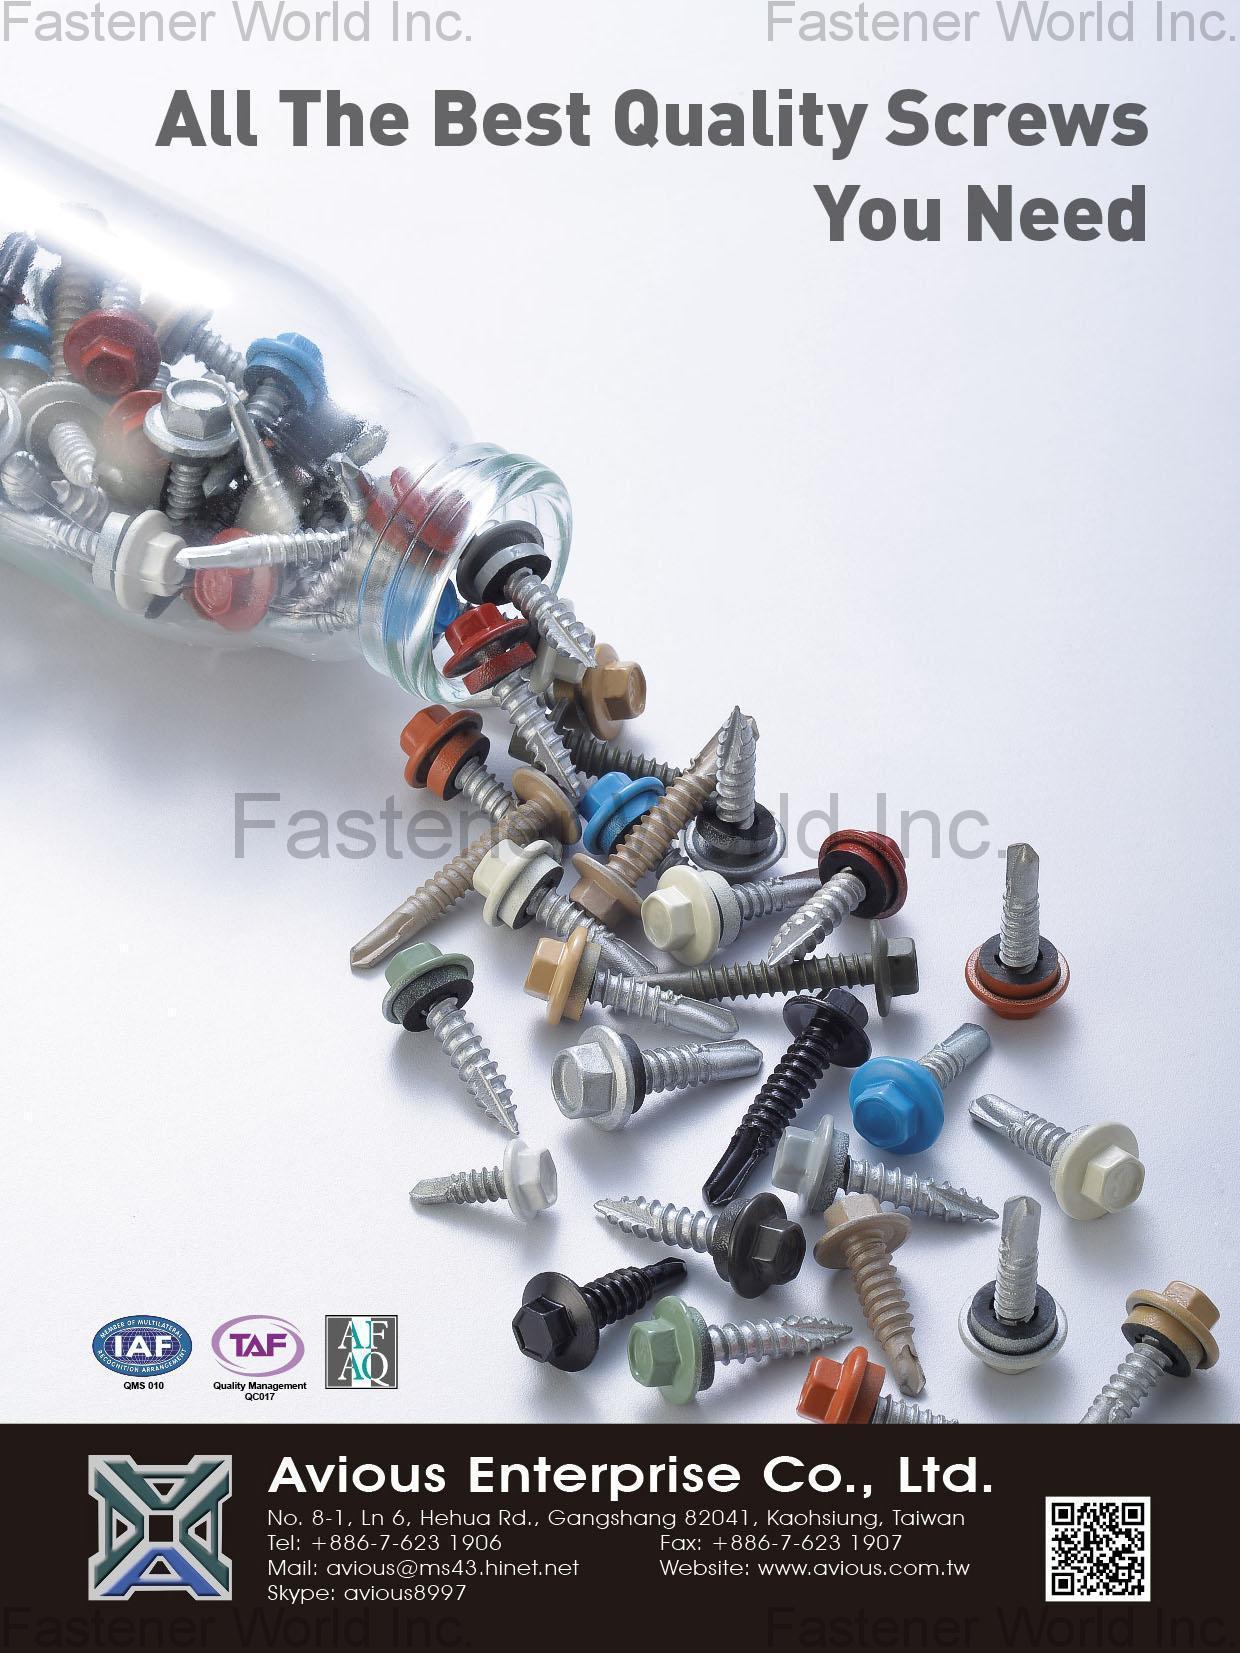 AVIOUS ENTERPRISE CO., LTD. , ScrewsCONE SEAT BOLT, BALL SEAT BOLT, HEX HEAD CONE SEAT BOLT, TORX DRIVE BOLT, FLANGE 12 POINT BOLT, SOCKET BOLT, STUD, TRUCK BOLT, MACHINE SCREW, SEMS Screw, SELF-TAPPING SCREW, SELF-DRILLING SCREW, THREAD-CUTTING SCREW, SELF-DRILLING SCREW WITH WINGS, Collated Screw, SPECIAL SCREW, NYLON PATCH, HIGH PERFORMANCE, WHEEL NUTS, SPECIAL NUTS, STANDARD NUTS, WASHERS , All Kinds of Screws